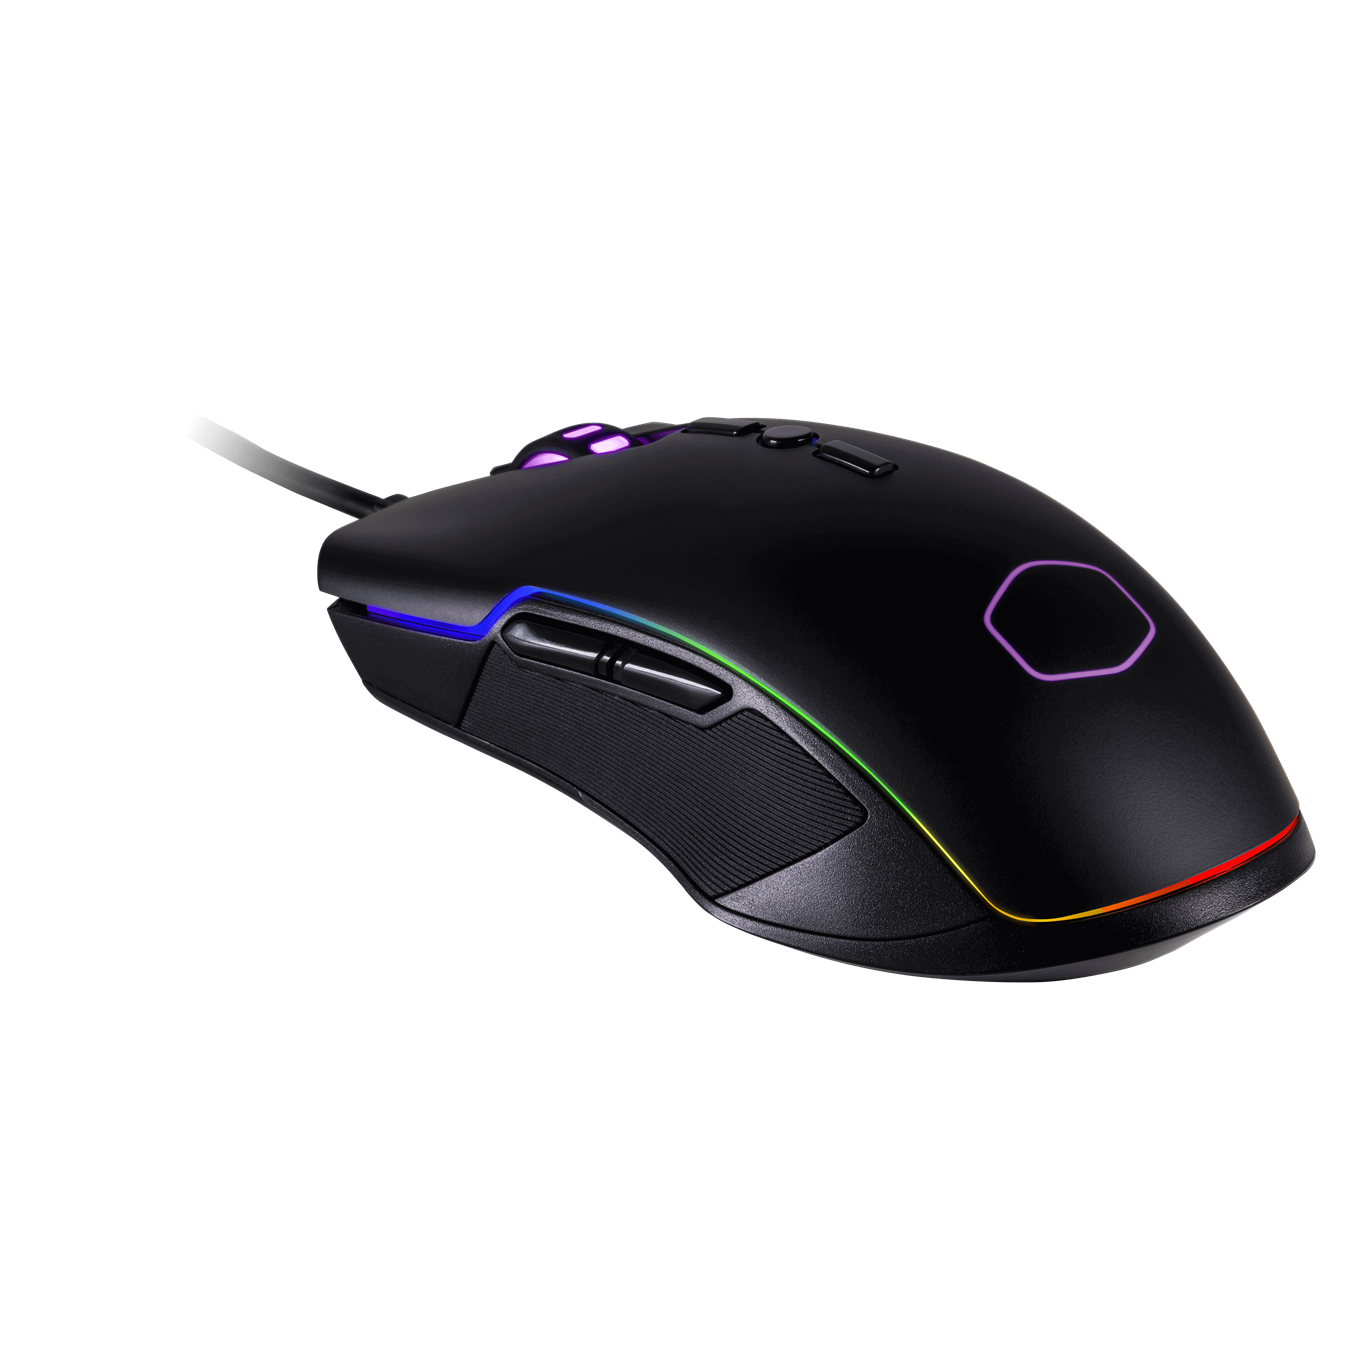 CM310 Gaming Mouse - Comfortable grip with unmatched stability and control.